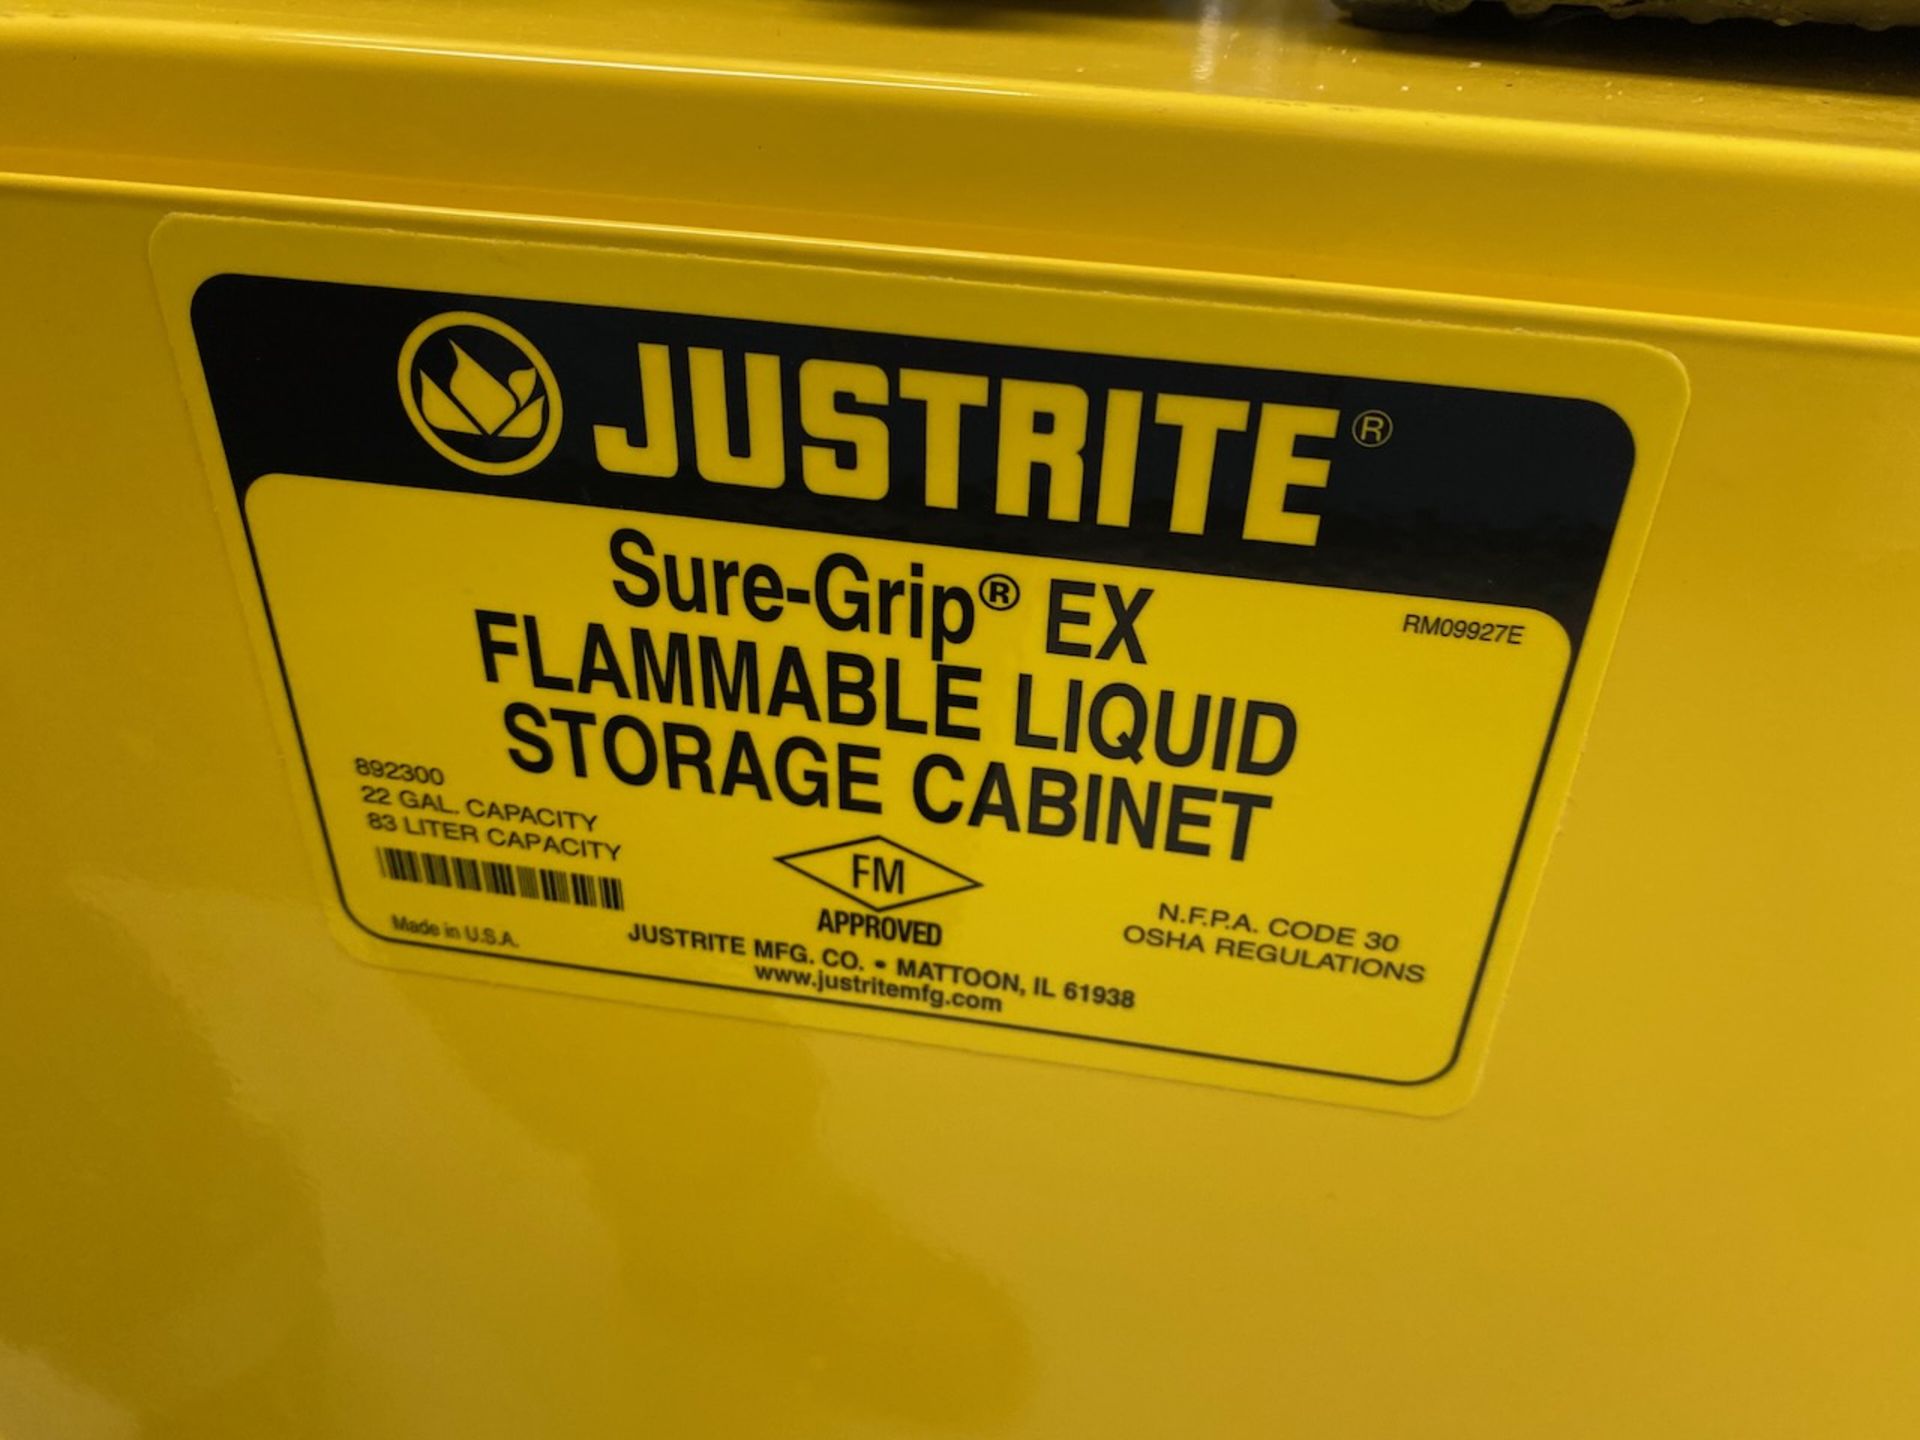 Justrite Flammable Storage Cabinet - Image 4 of 4